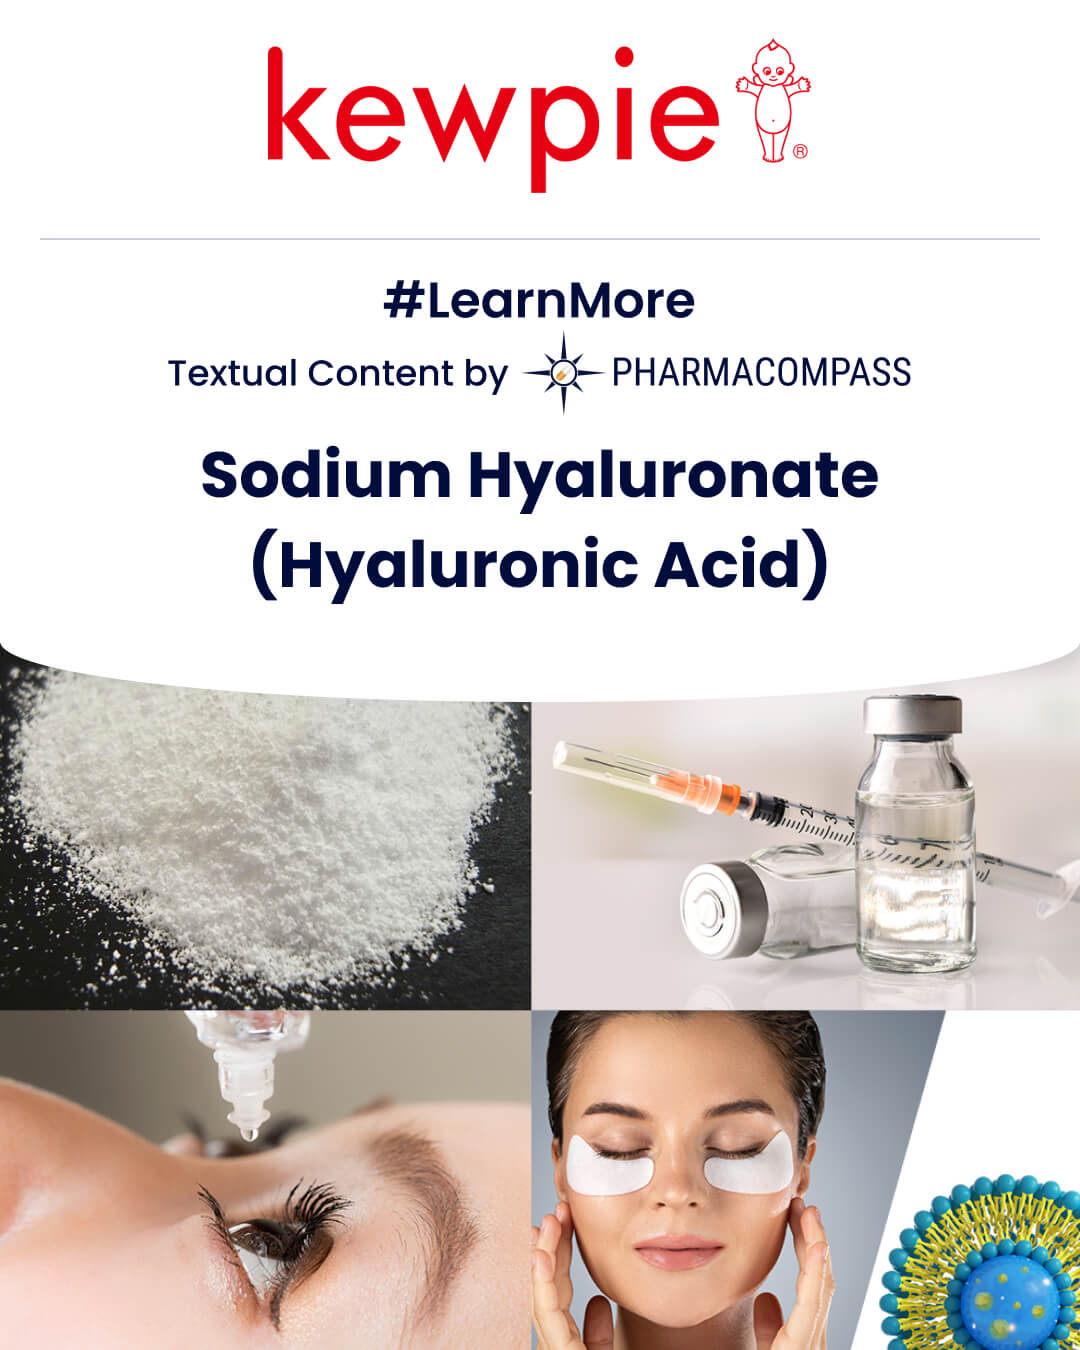 View Kewpie`s pharmaceutical grade Sodium hyaluronate & browse its different grades of Hyaluronic Acid for injectables & eye drops on PharmaCompass.